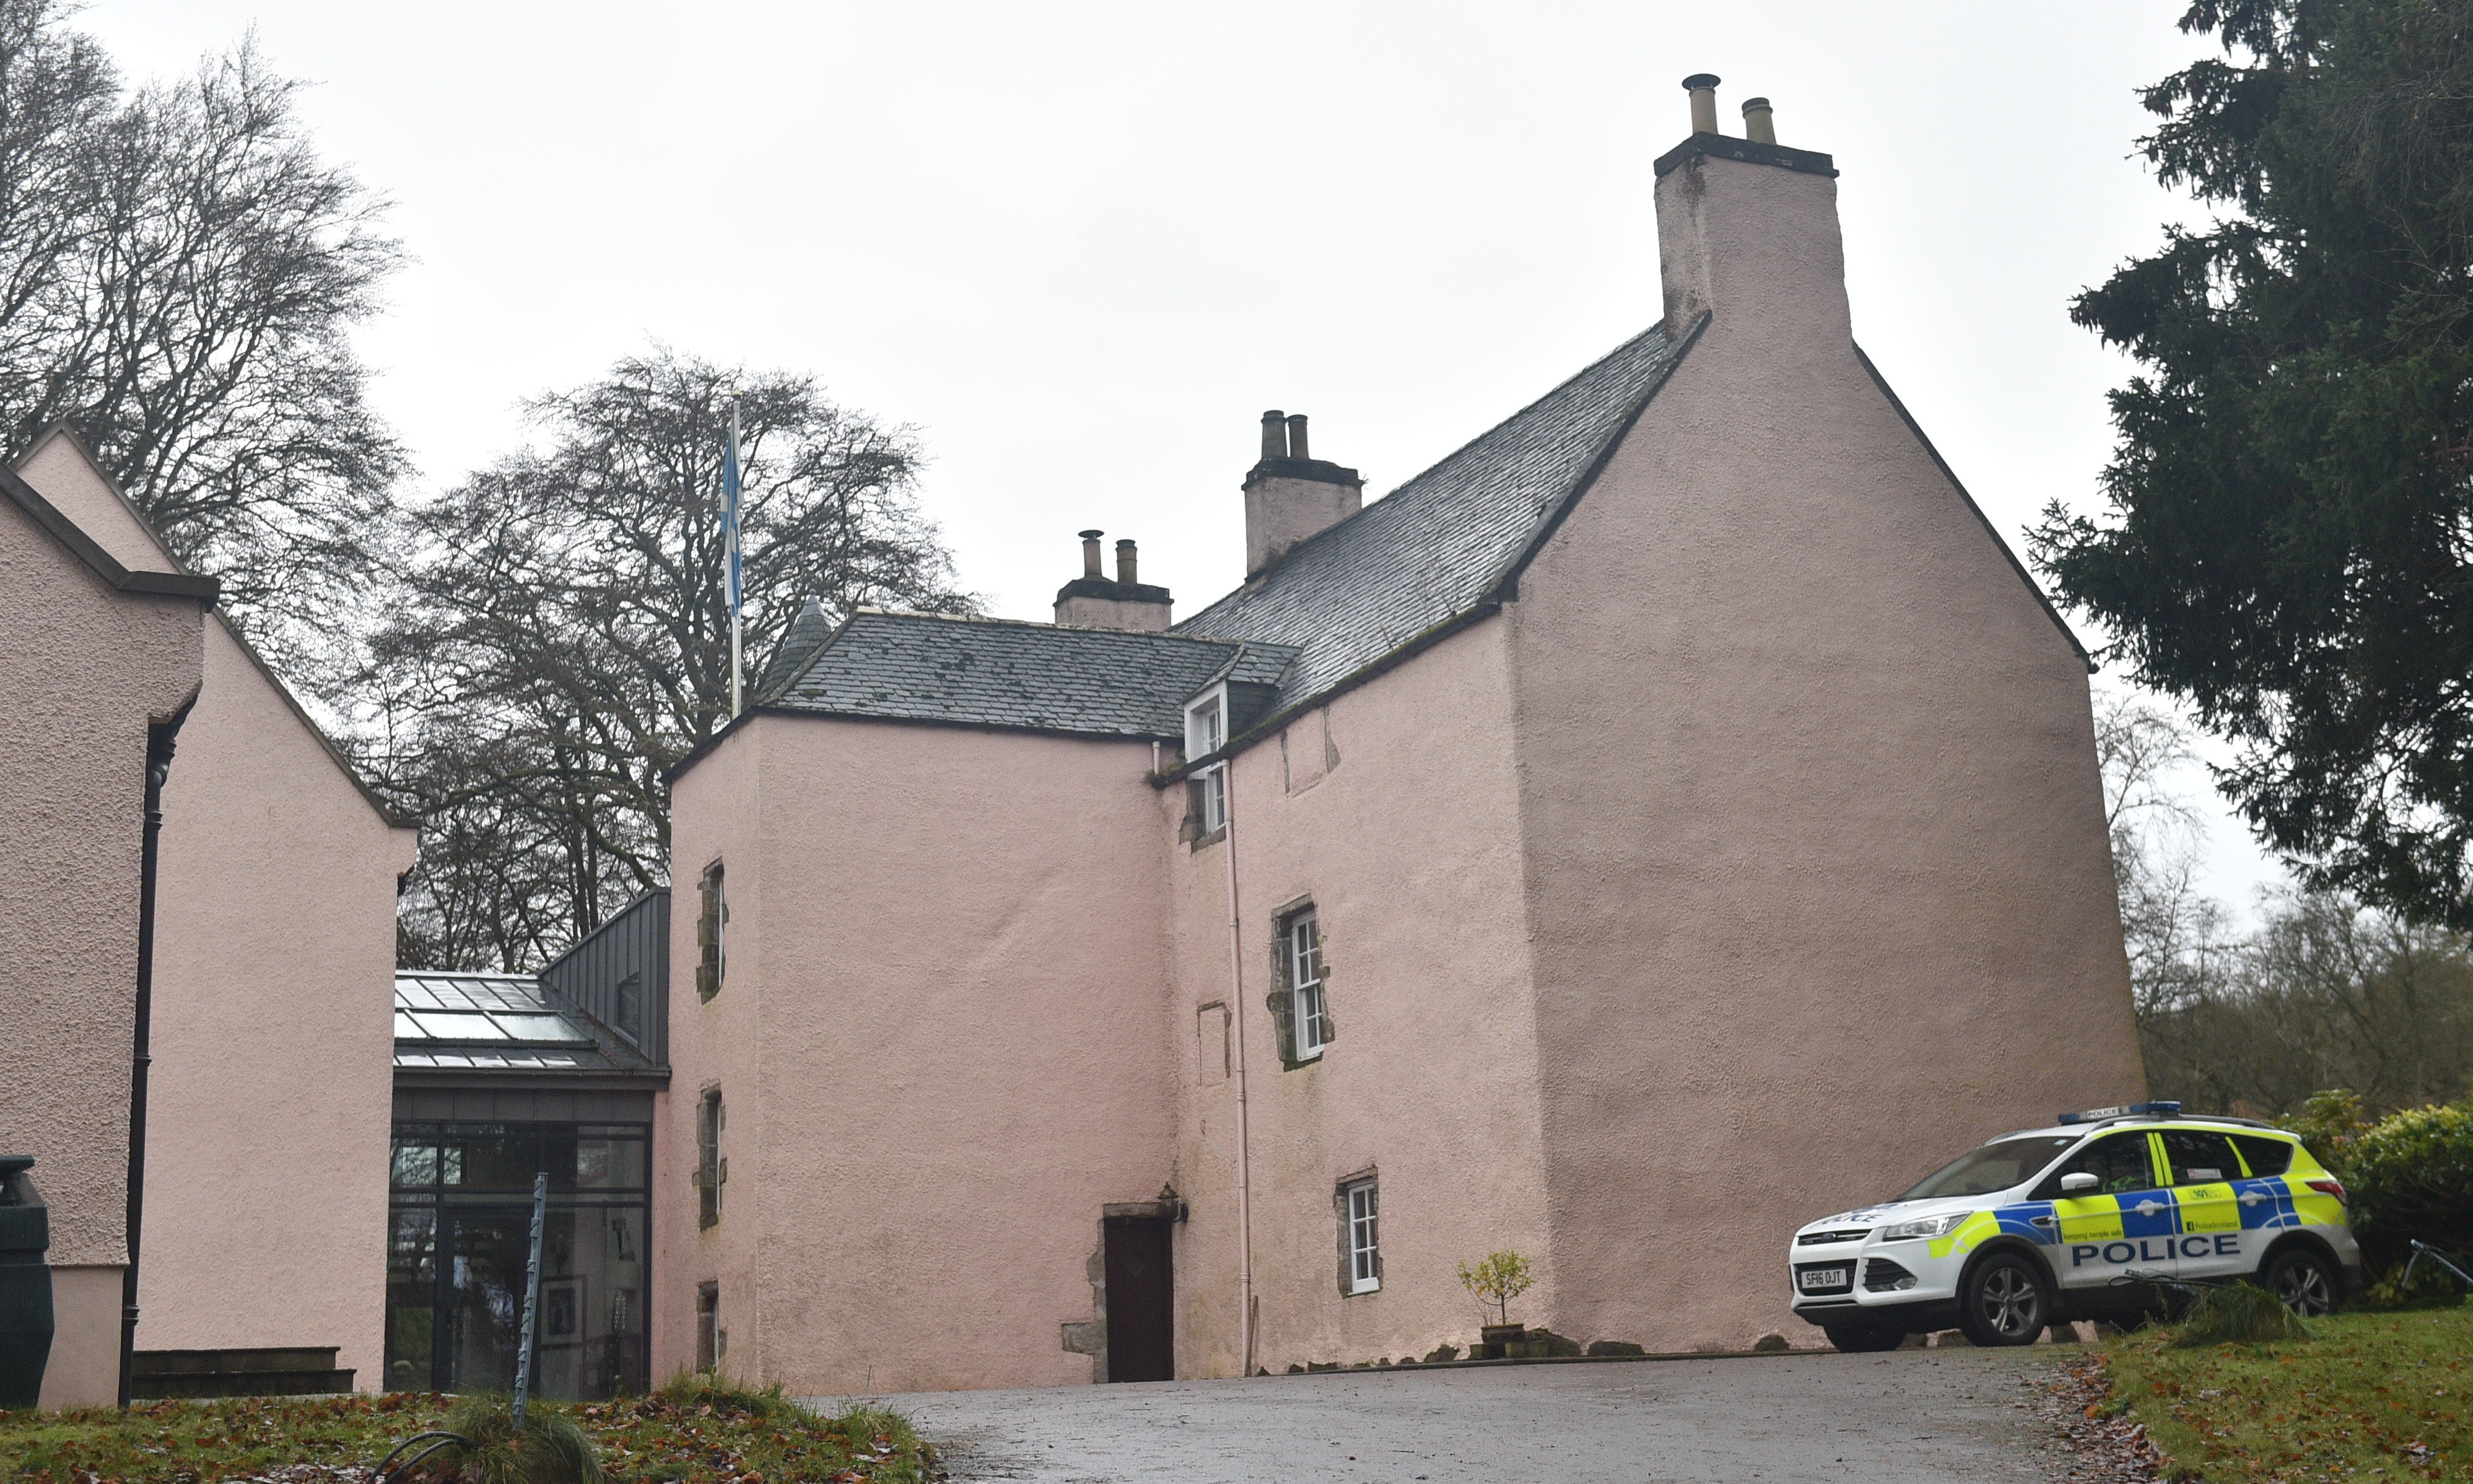 Police at the scene of where two bodies were found at Mergie Holiday Cottages on the Mergie Estate, Rickarton area, West of Stonehaven.